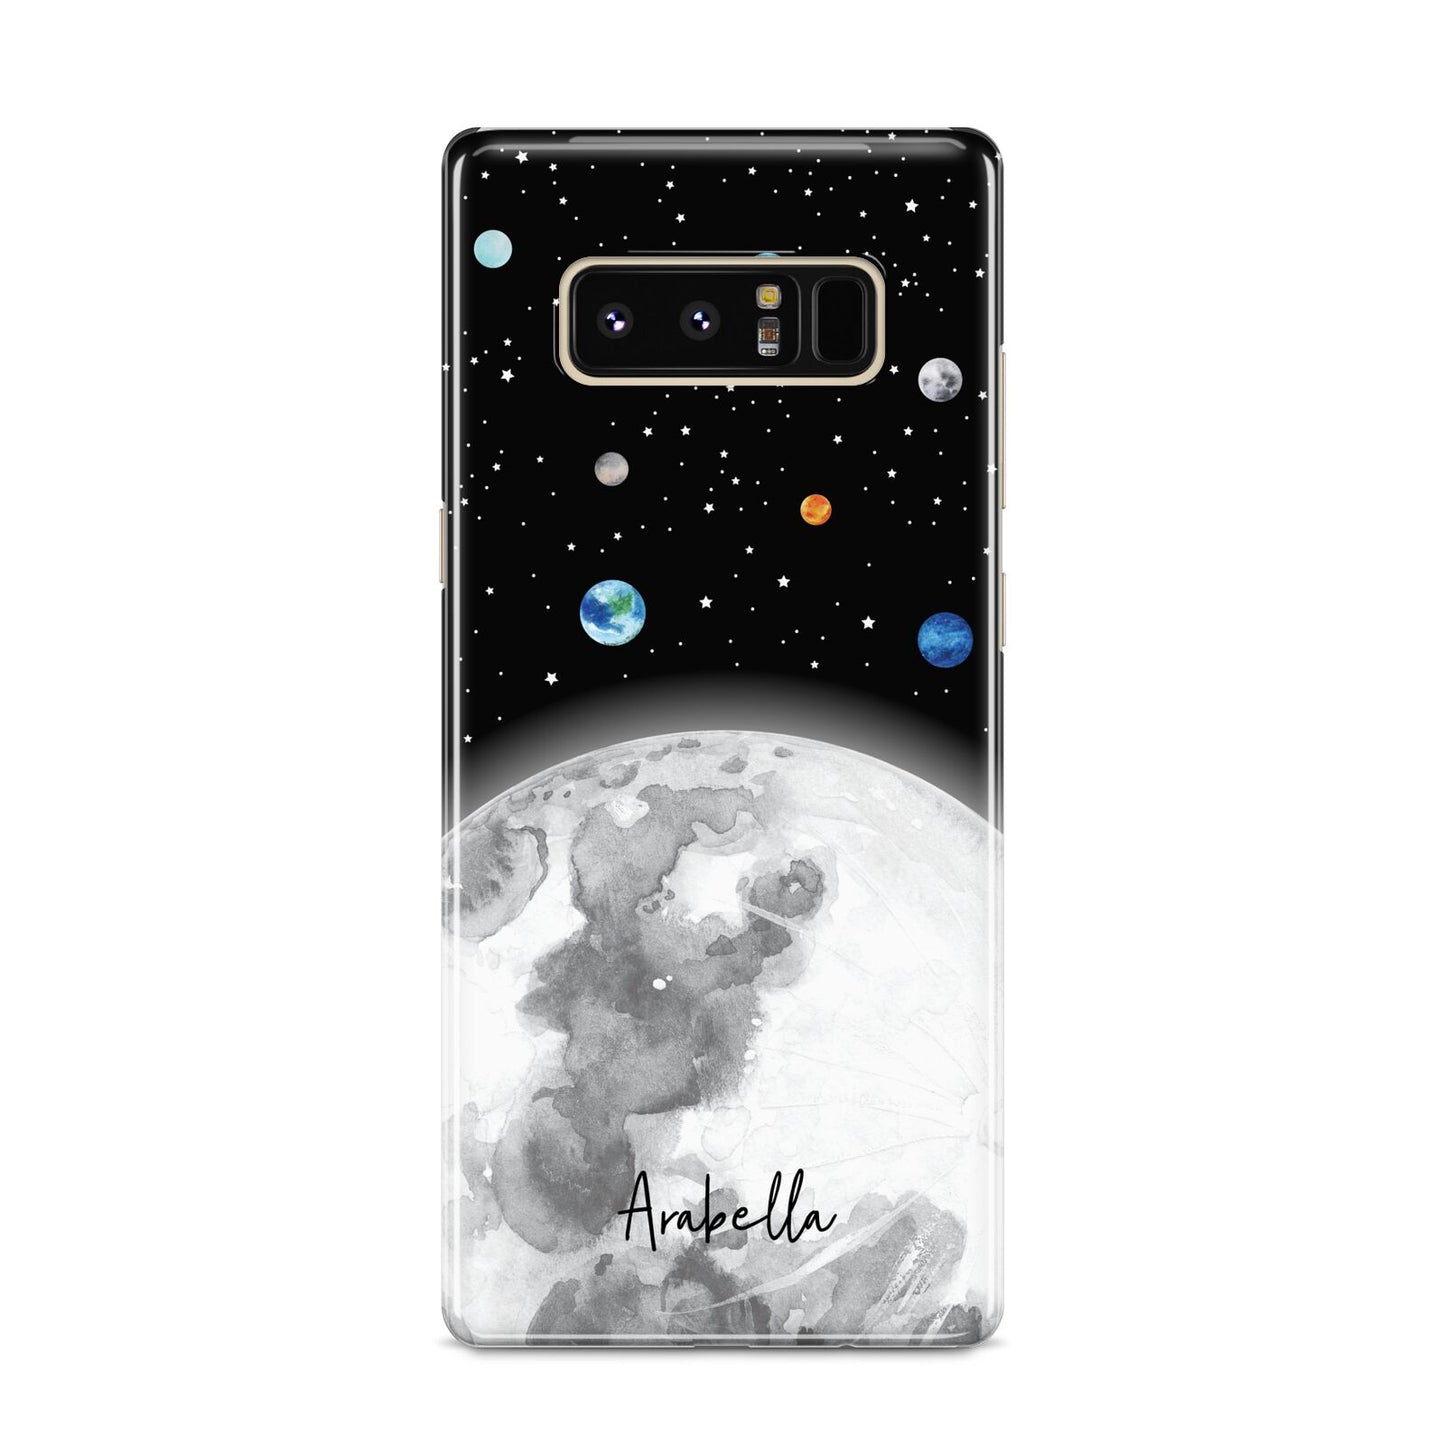 Watercolour Close up Moon with Name Samsung Galaxy S8 Case